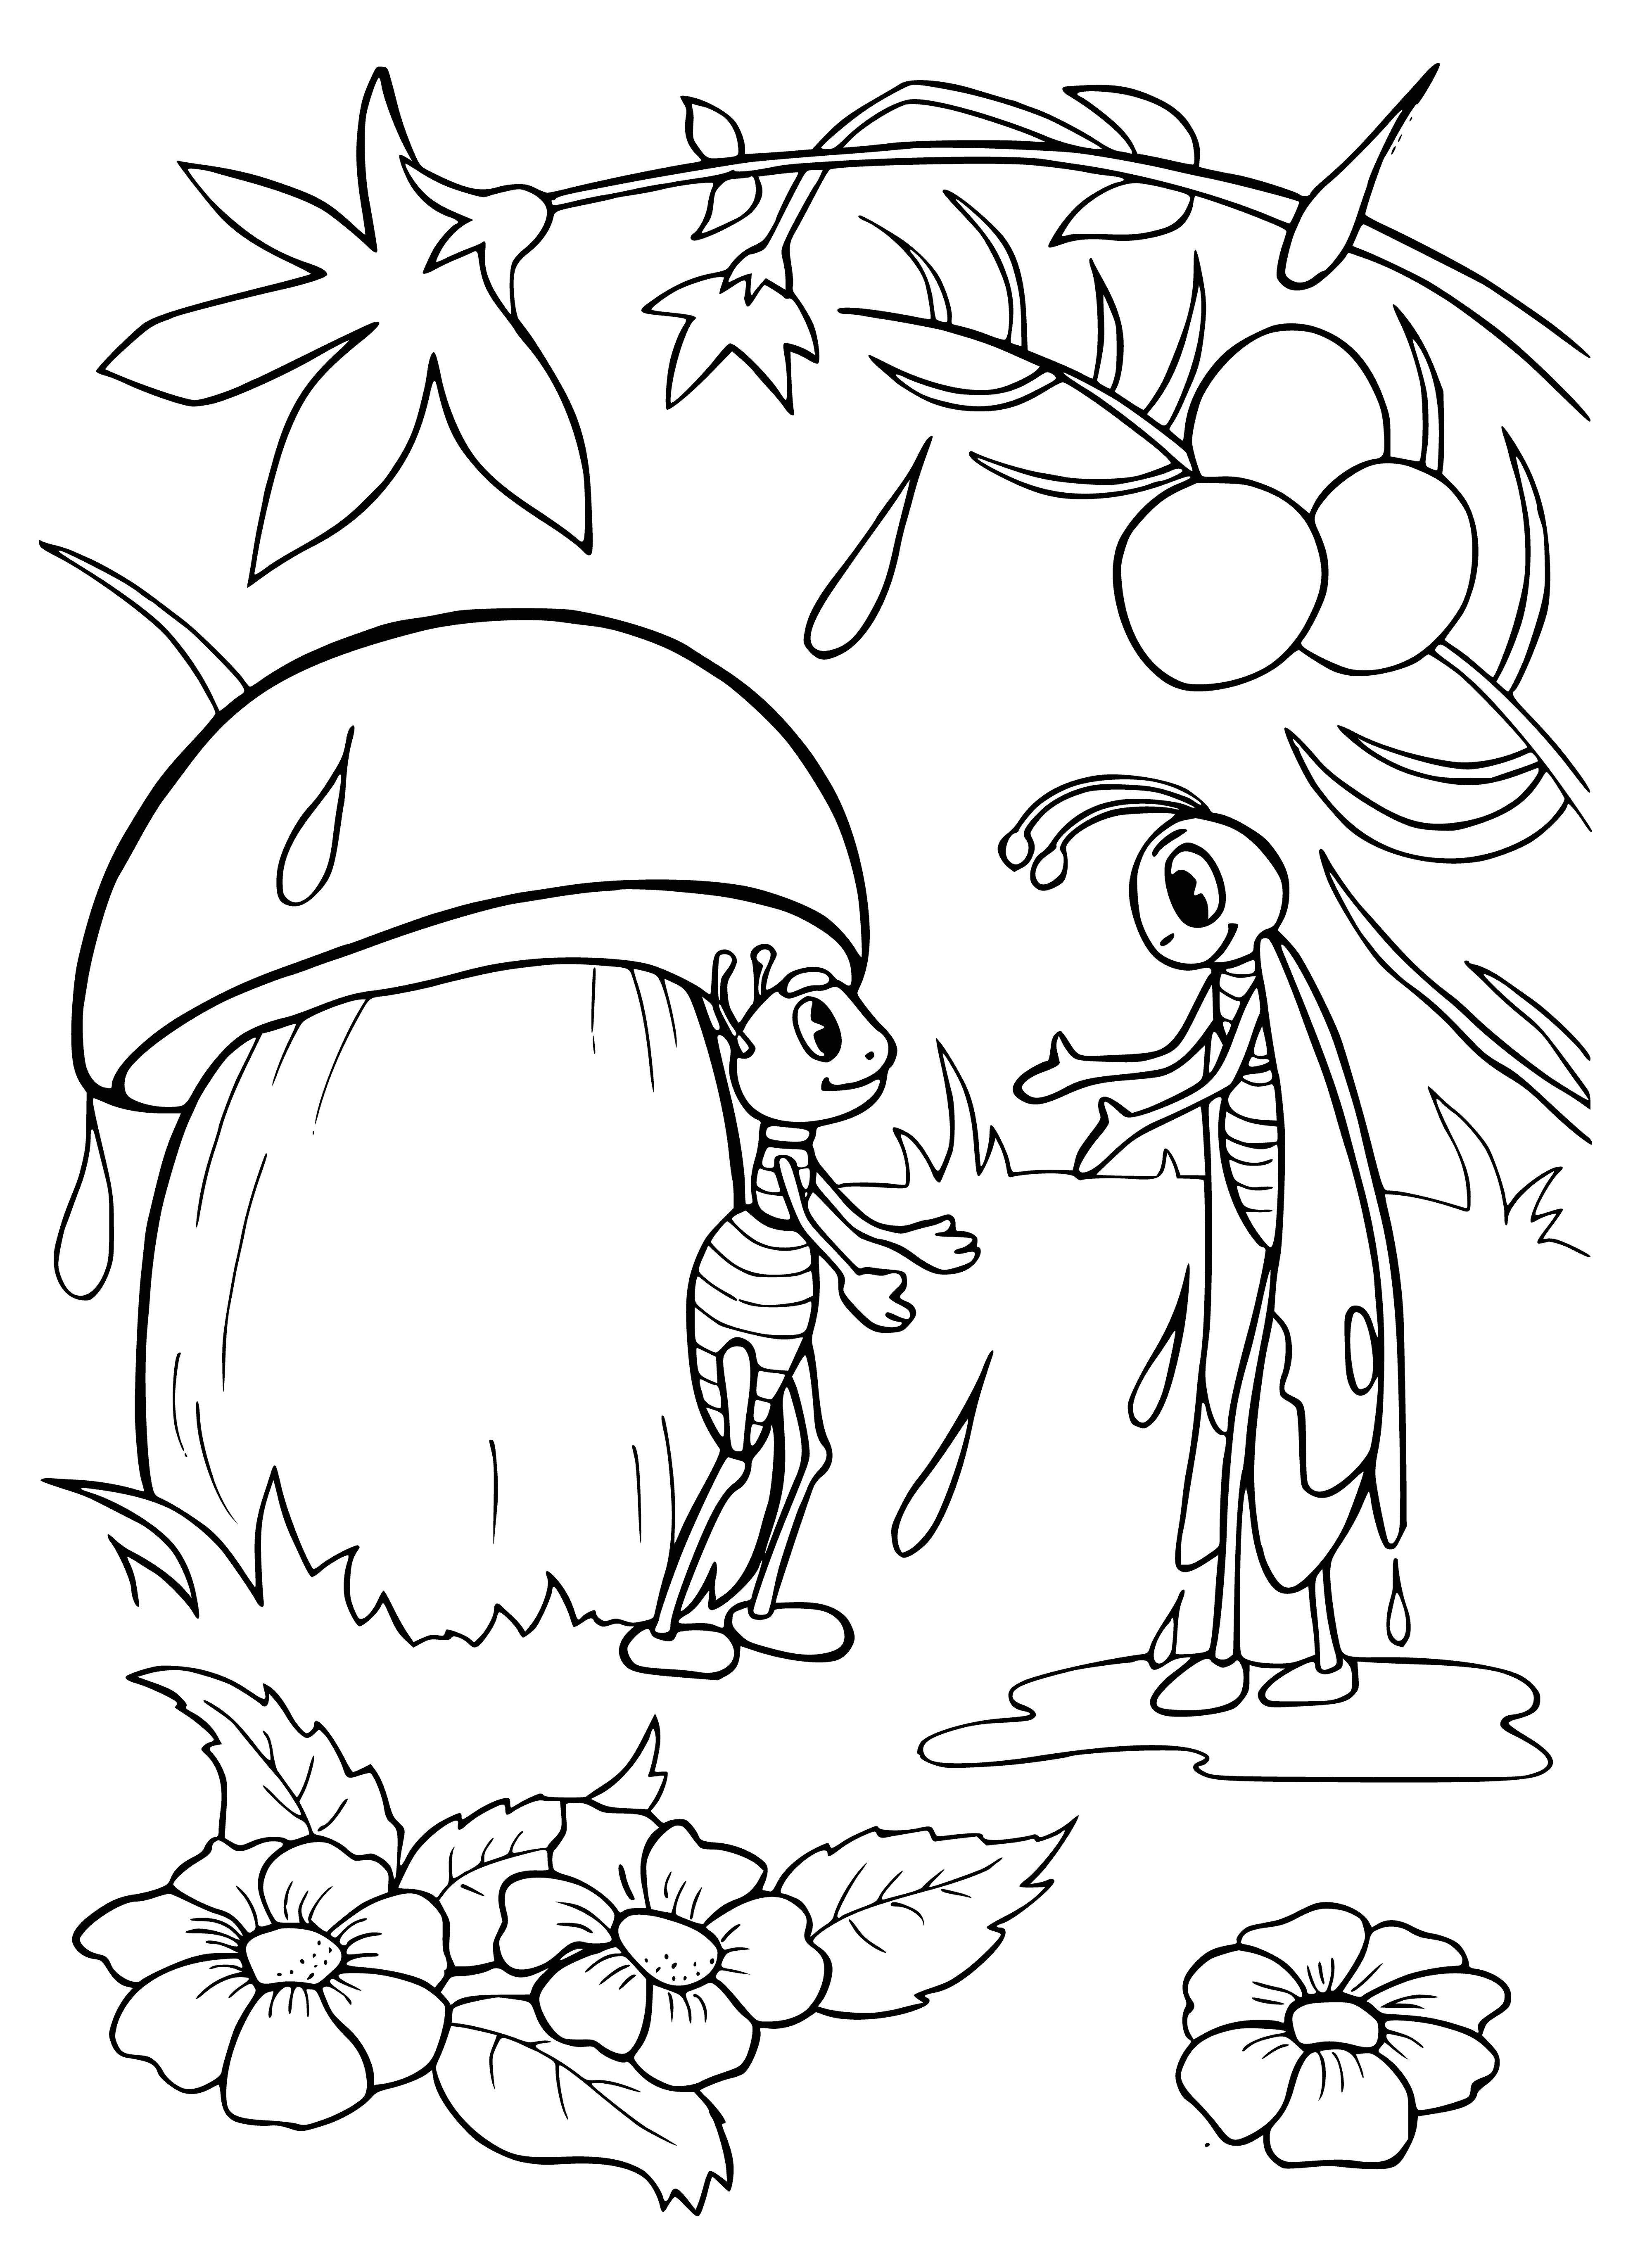 coloring page: A butterfly and ant peacefully share an afternoon on a mushroom next to a babbling stream.